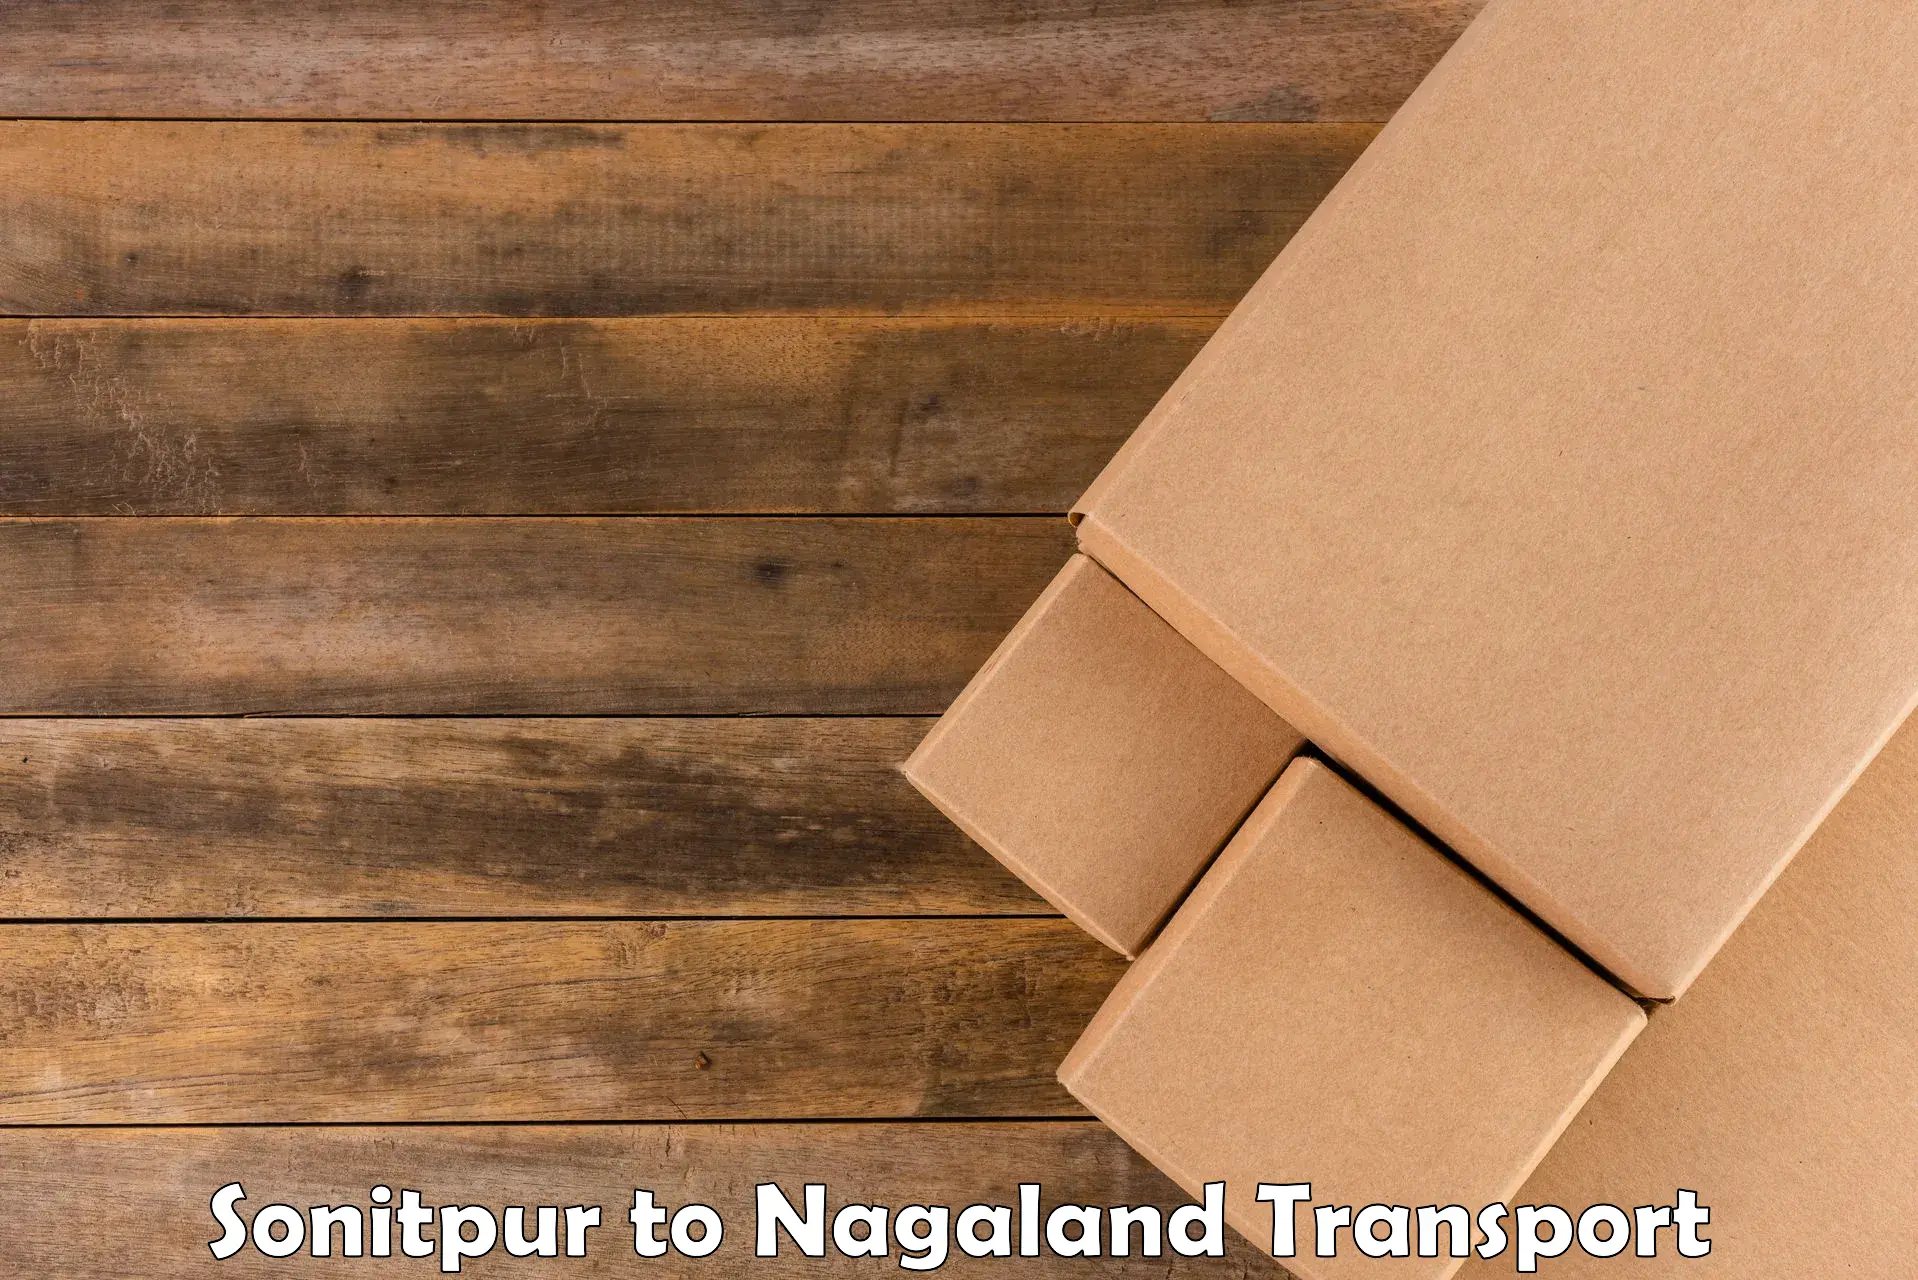 Daily parcel service transport Sonitpur to Nagaland